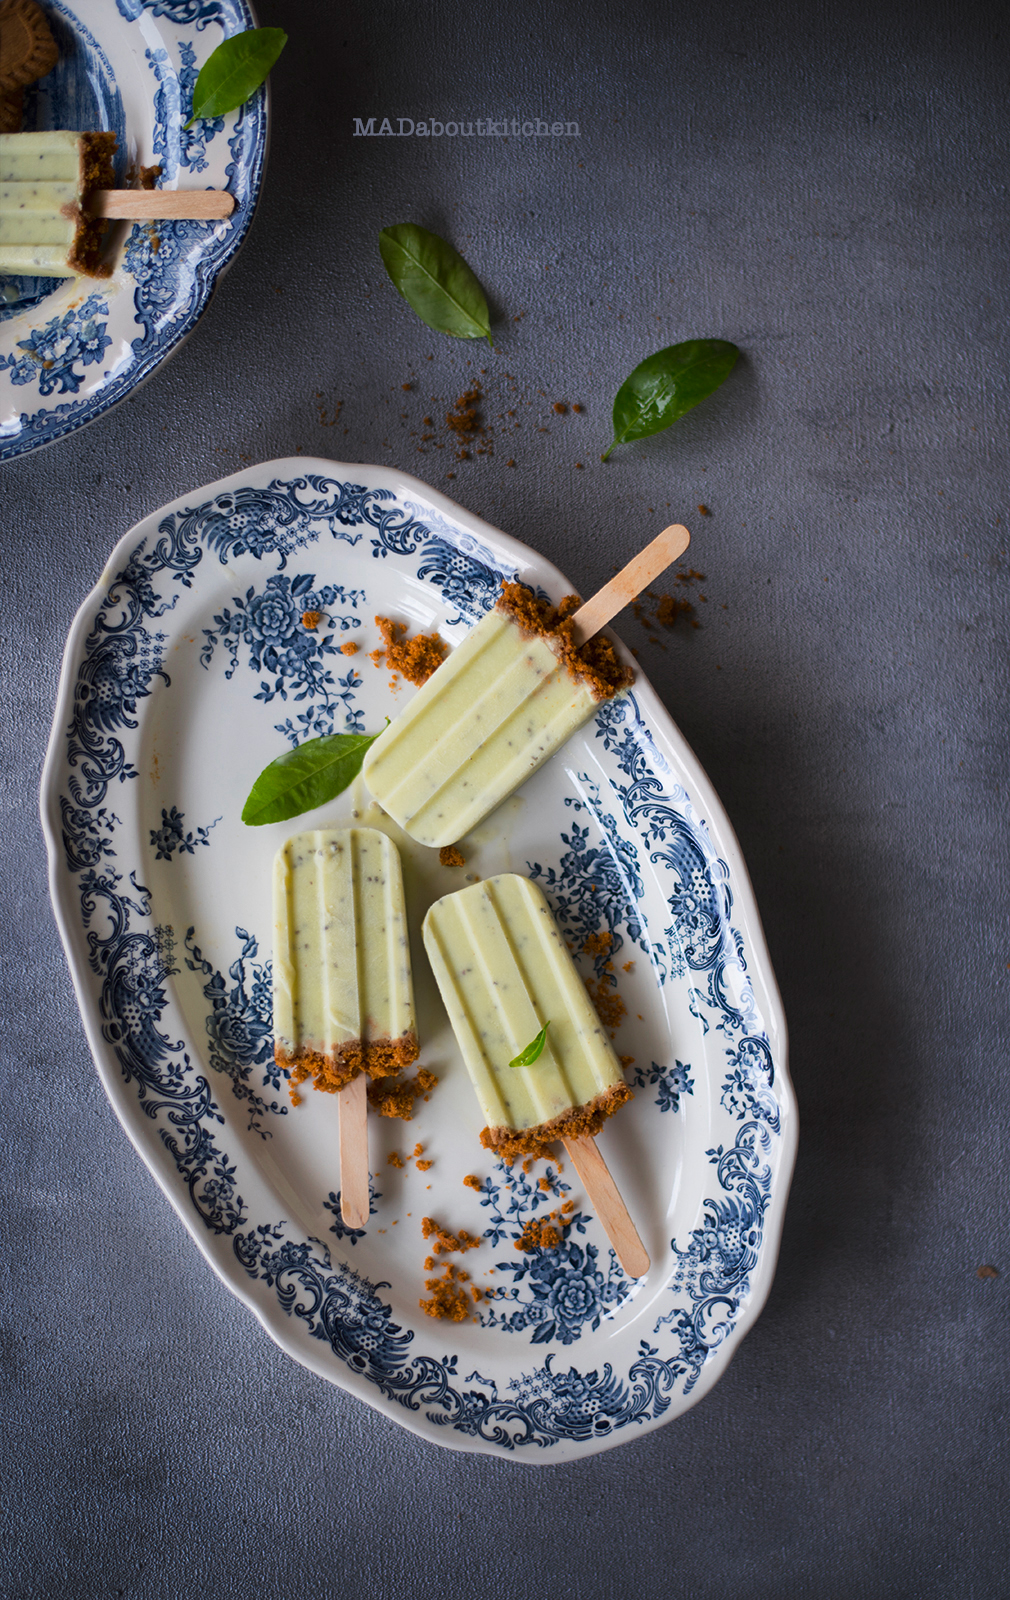 Avocado Chia Seed Popsicle is one of the most easiest and fun popsicle you can make. Avocado being creamy in nature makes this popsicle so much more creamier and rich.